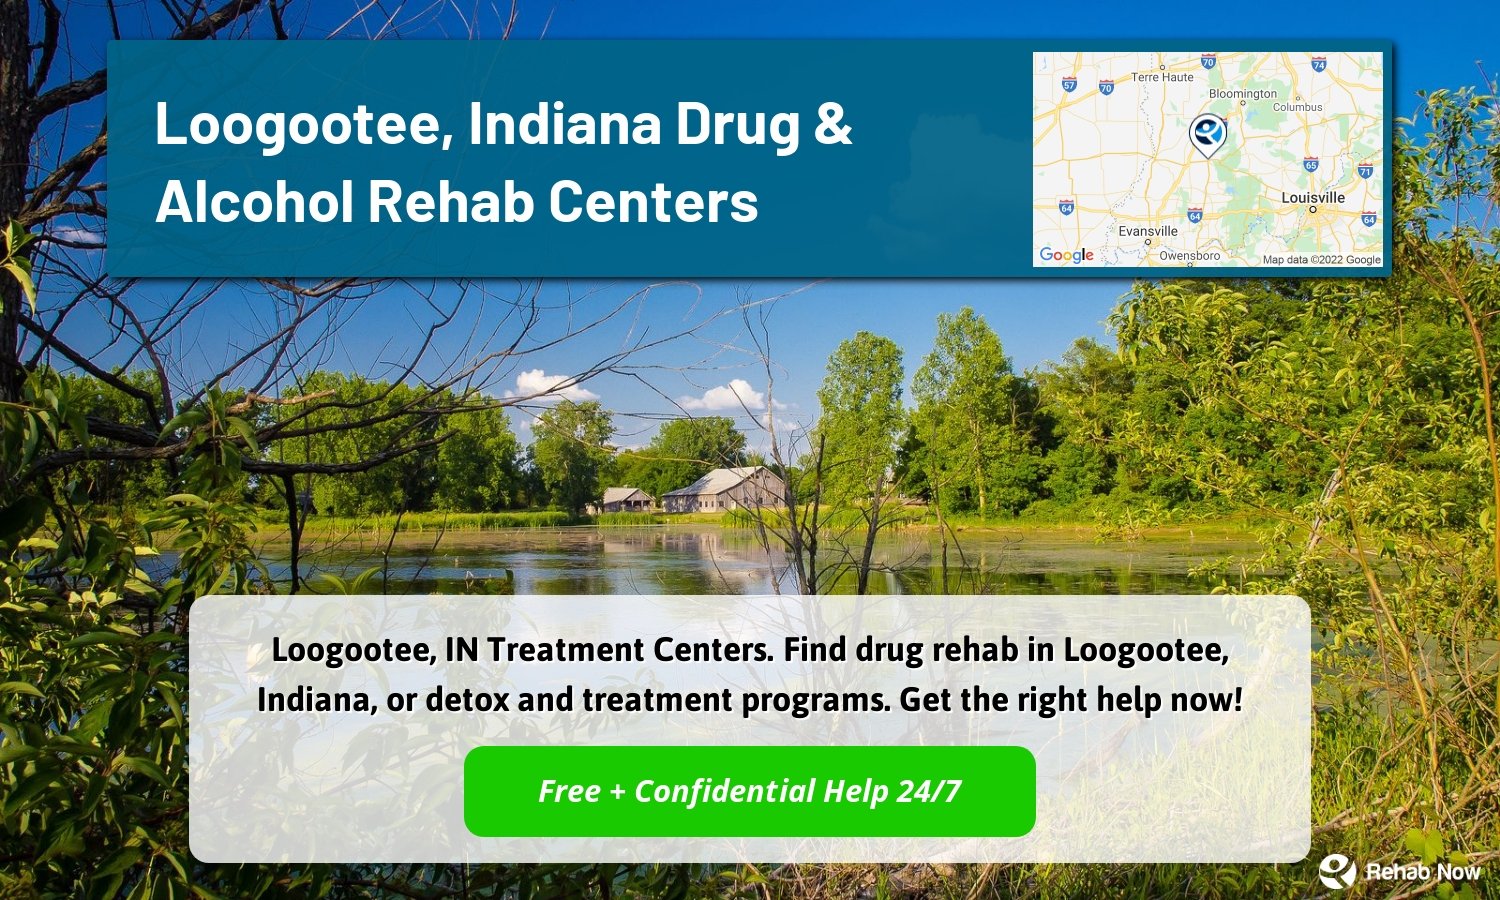 Loogootee, IN Treatment Centers. Find drug rehab in Loogootee, Indiana, or detox and treatment programs. Get the right help now!